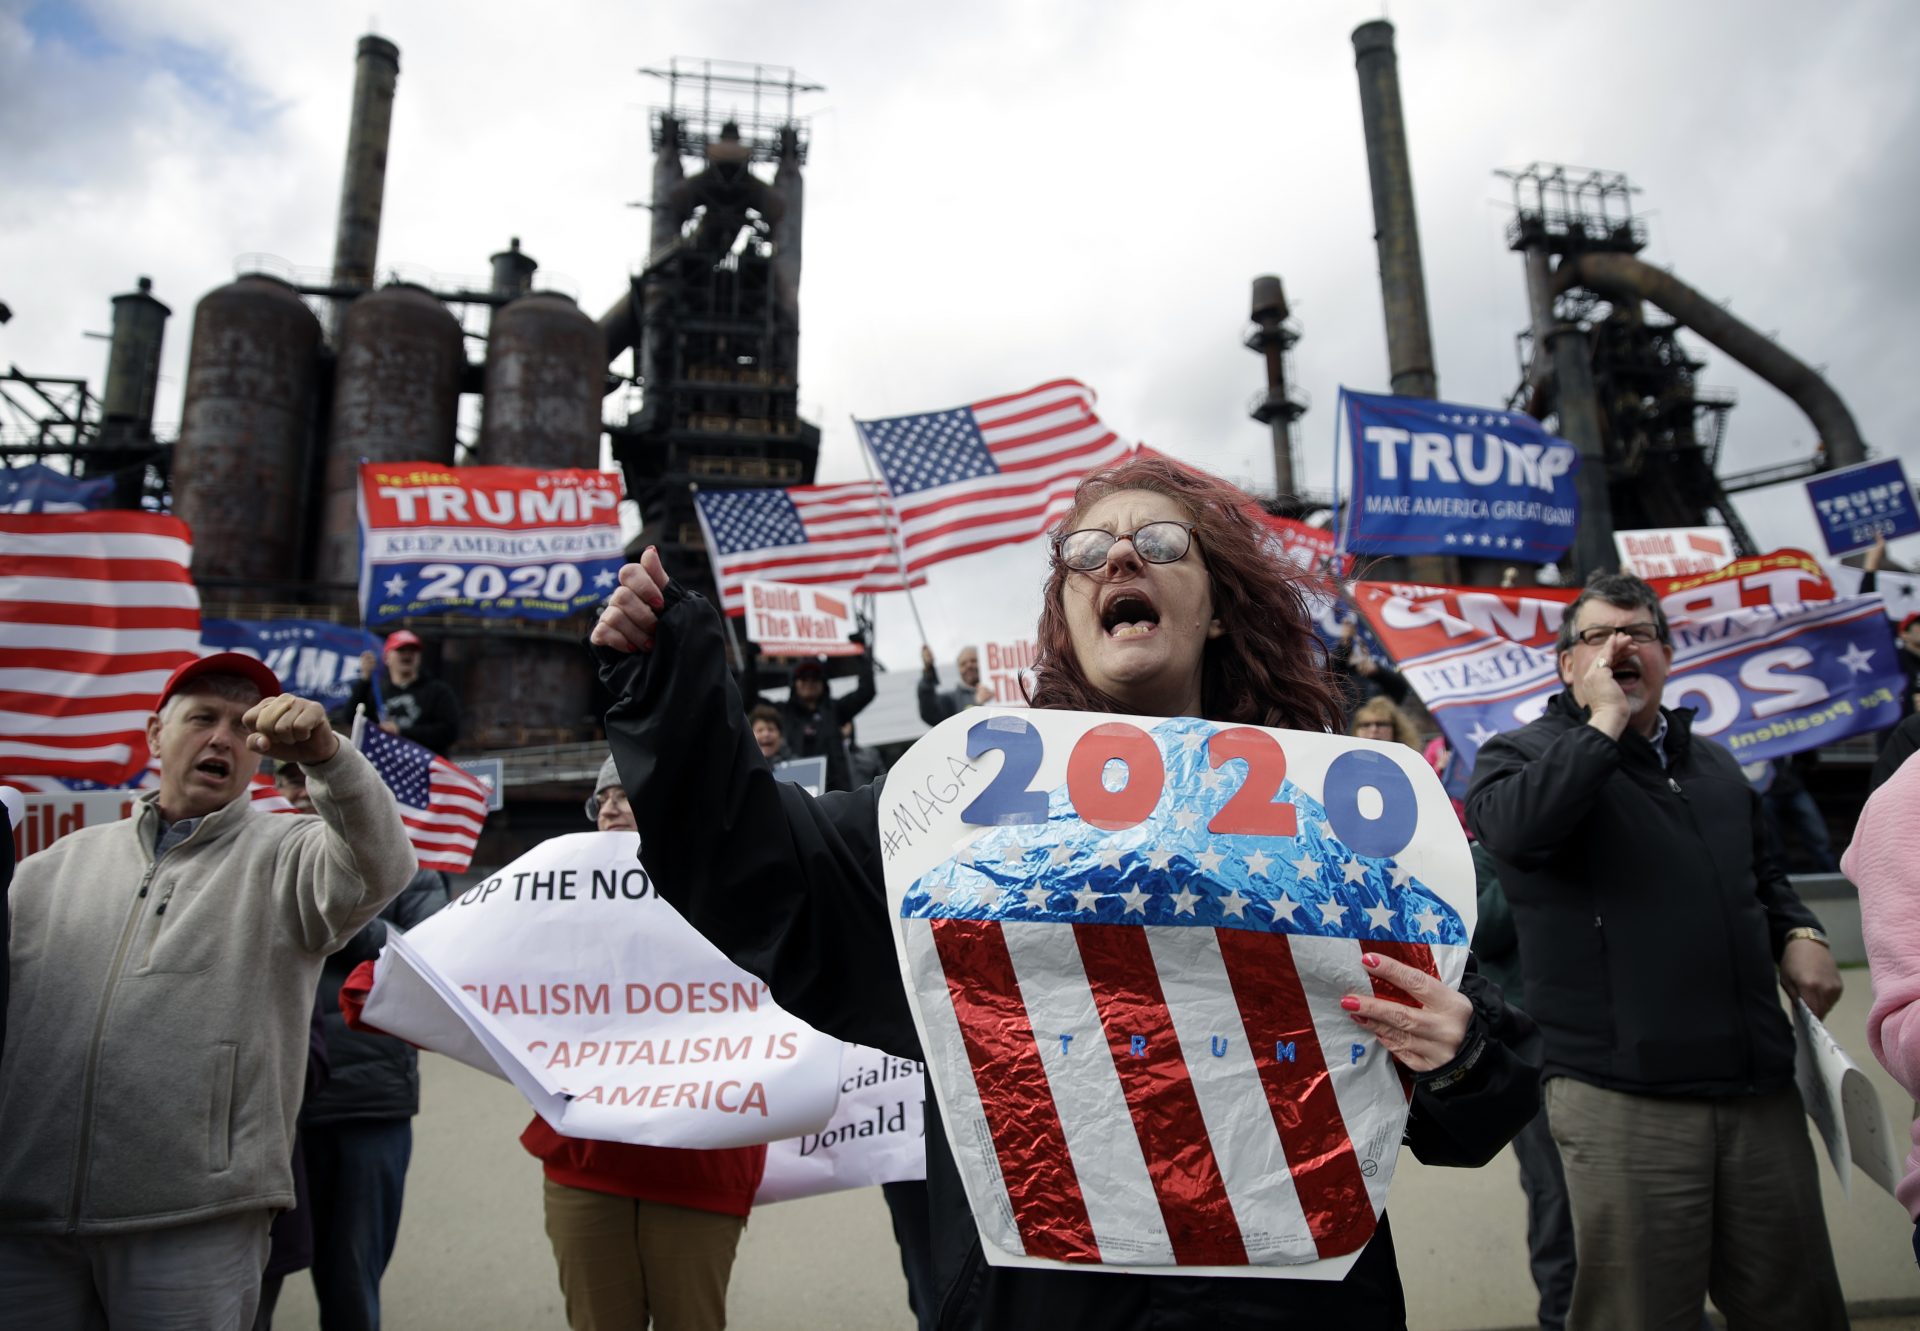 Protesters demonstrate in support of President Donald Trump near a Fox News town-hall style event with U.S. Sen. Bernie Sanders in April in Bethlehem, Pa. The city is split between Lehigh and Northampton counties.